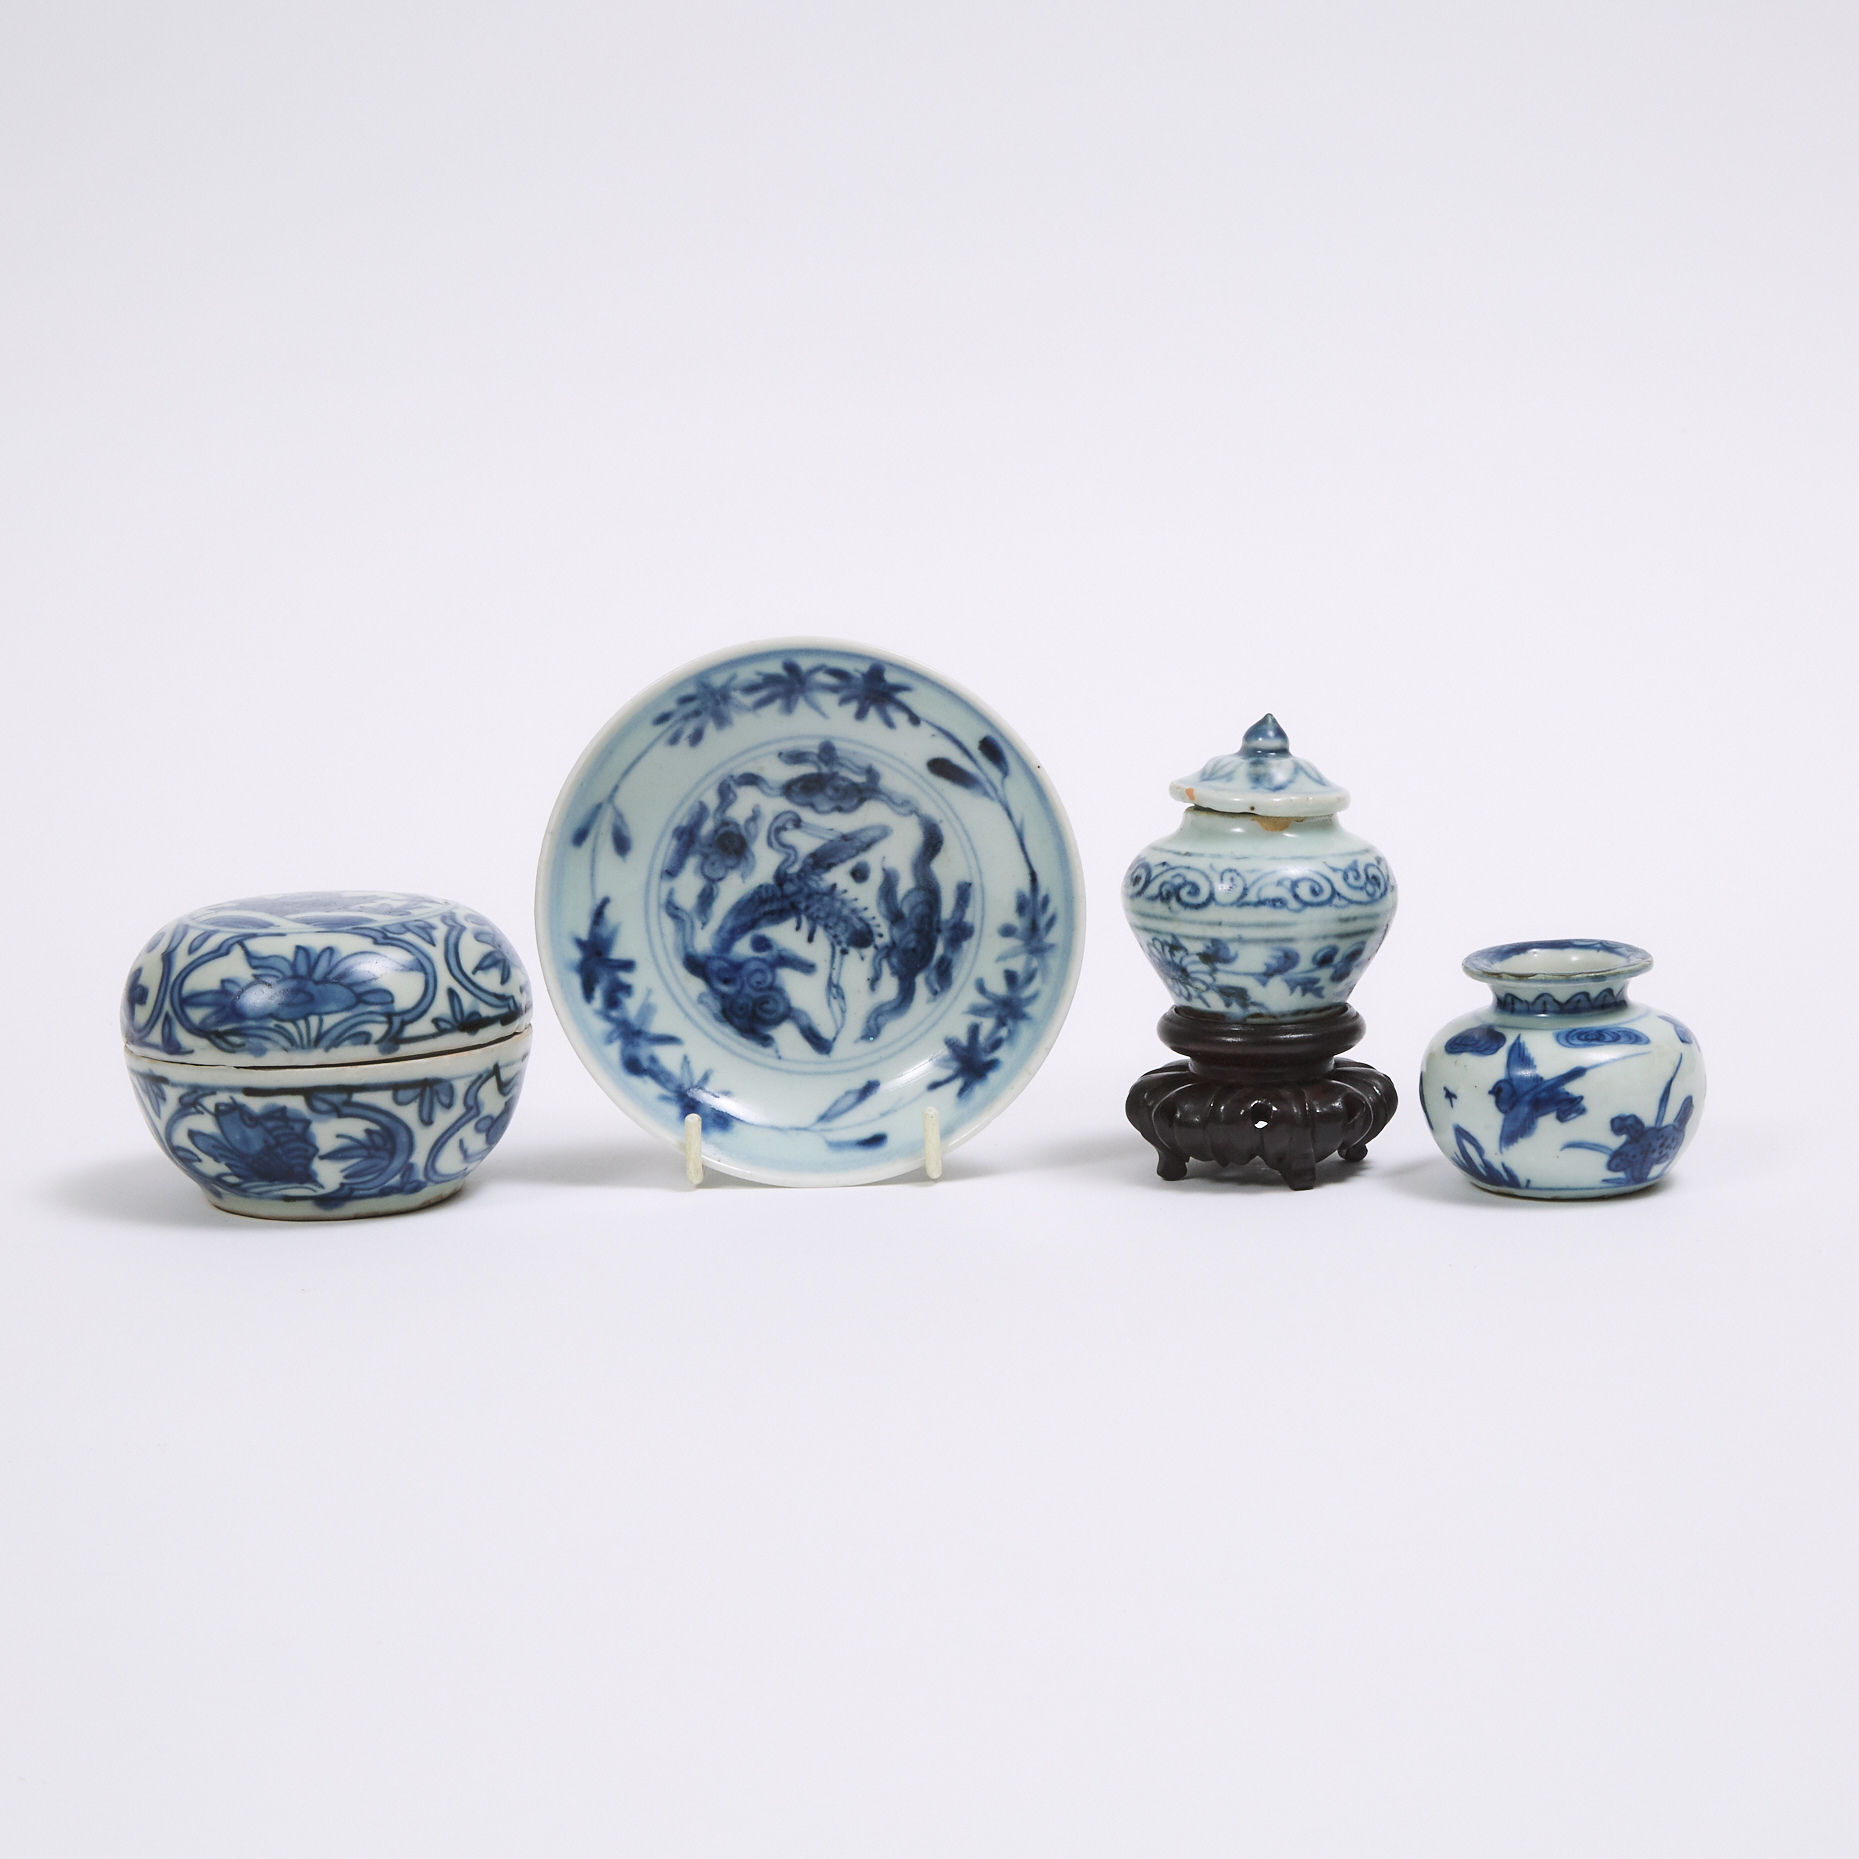 A Group of Four Blue and White Porcelain Wares, Ming Dynasty